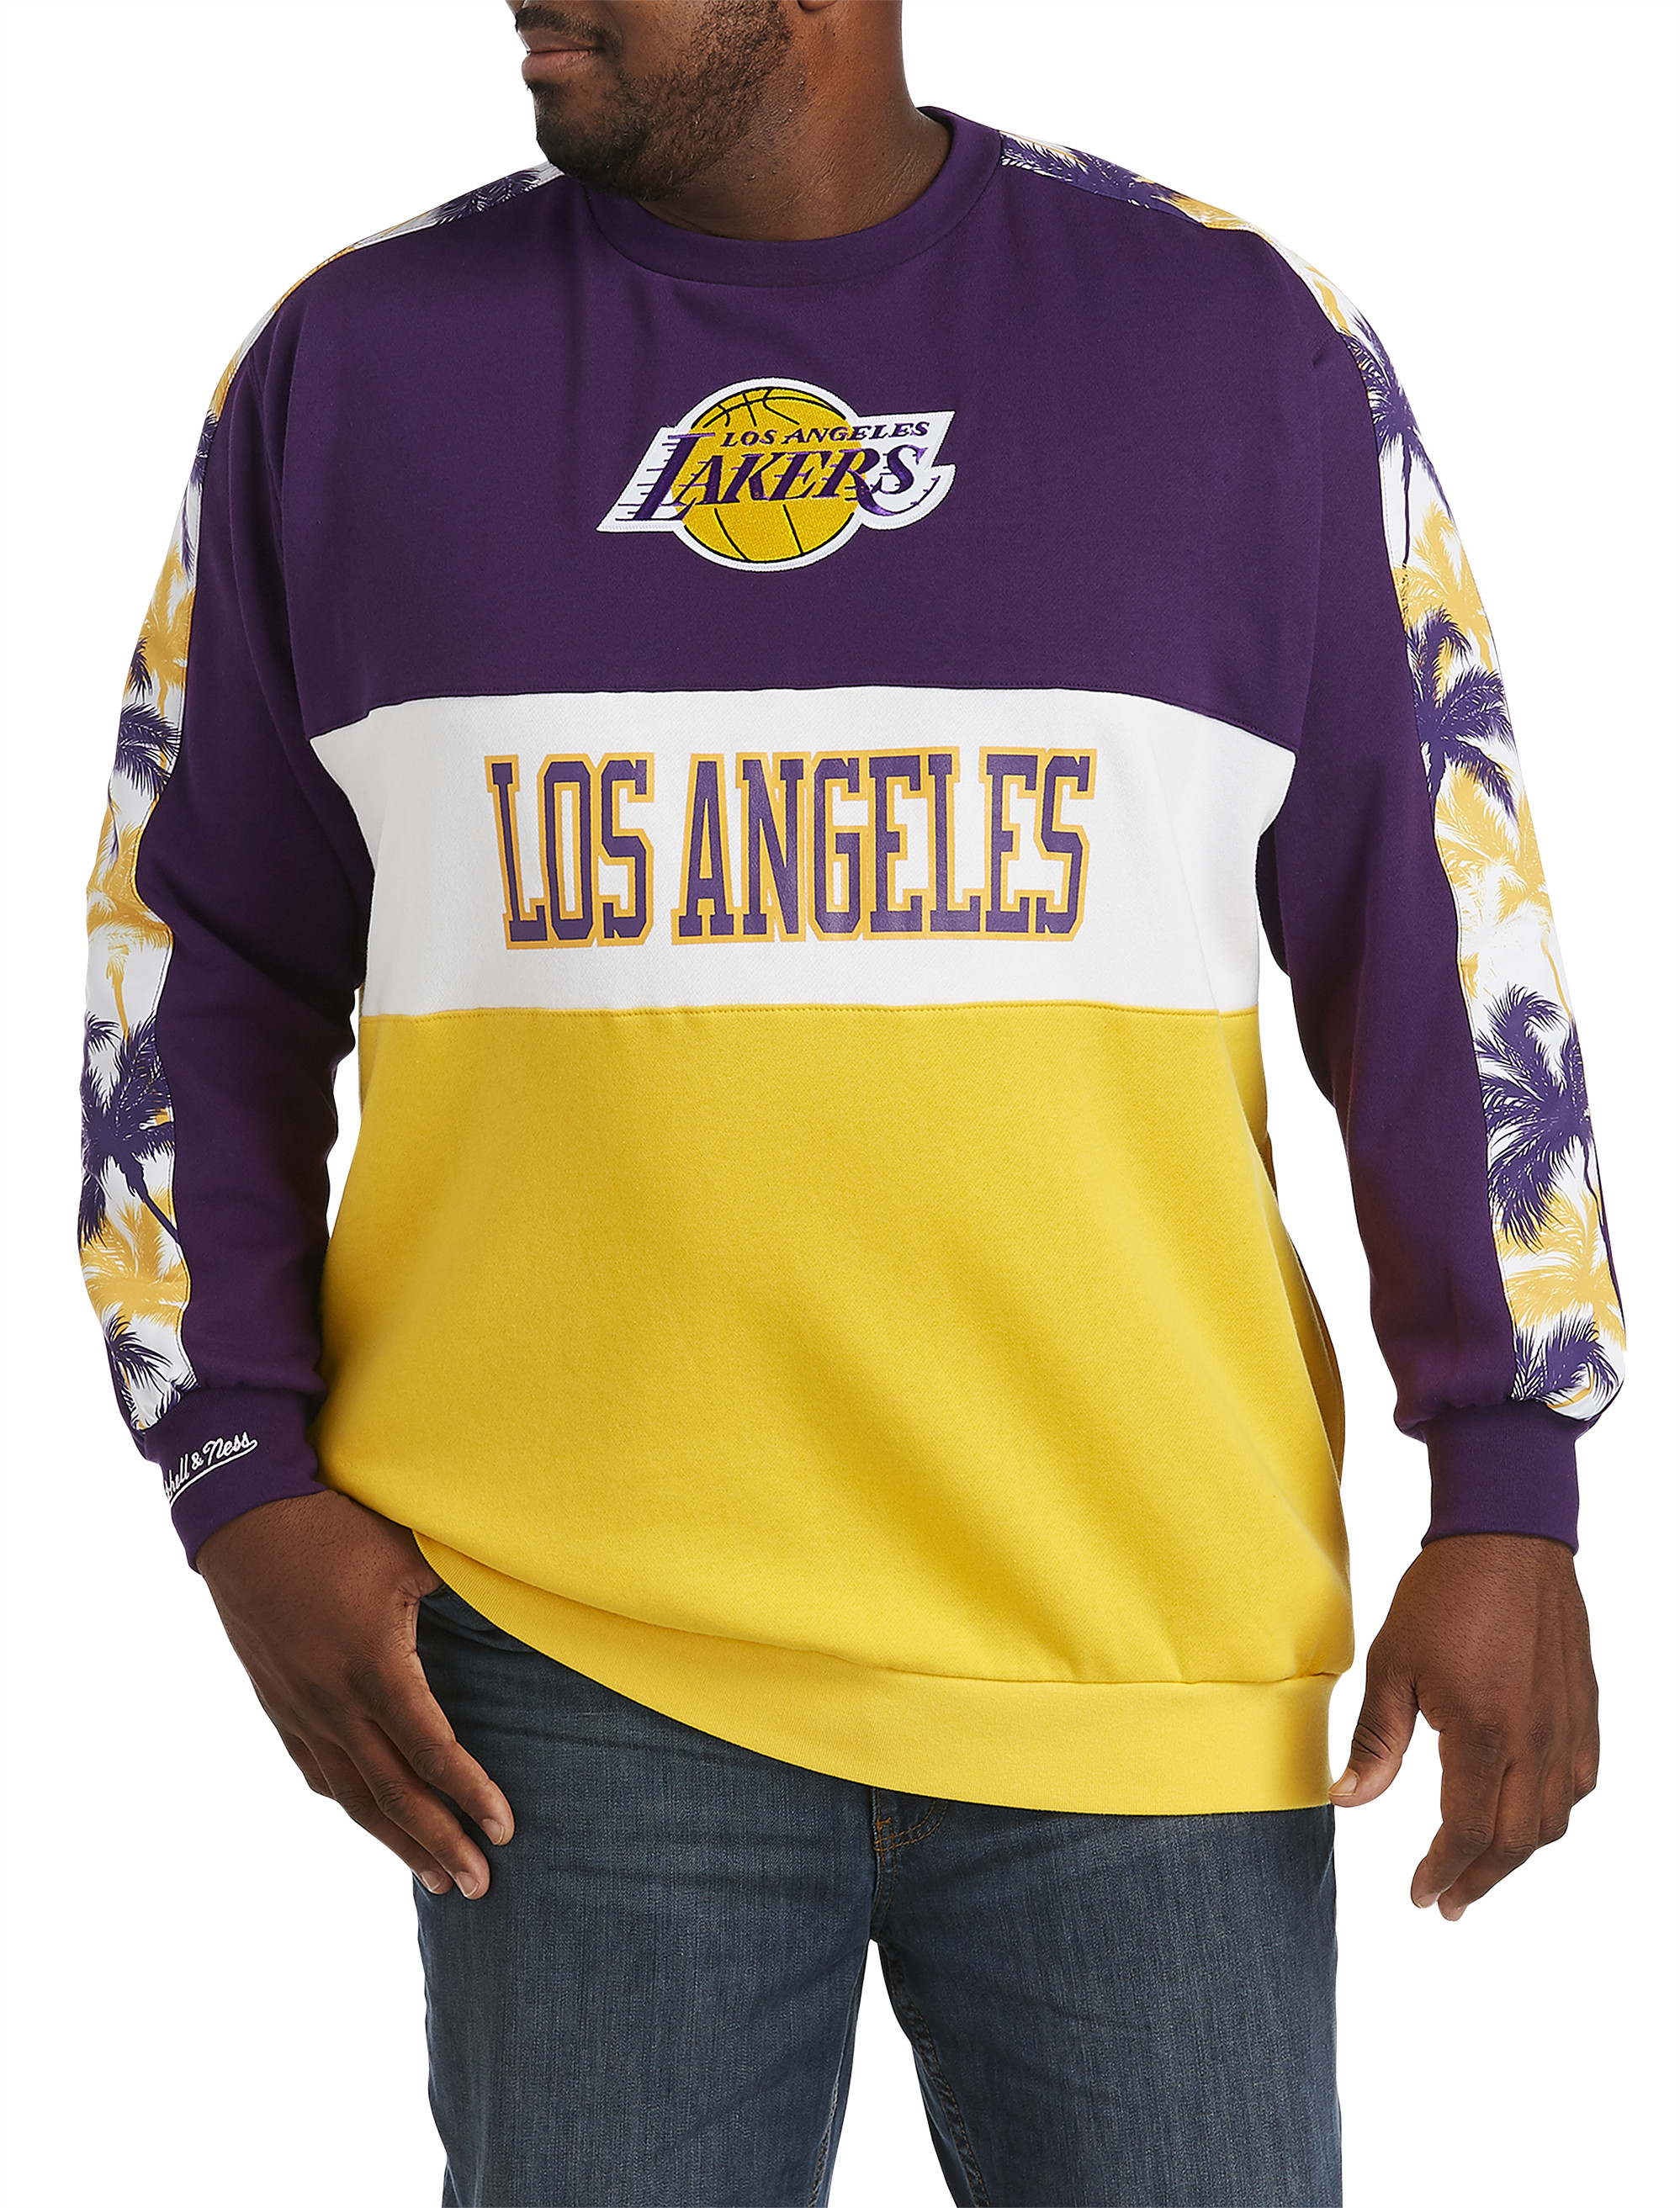 lakers jersey big and tall